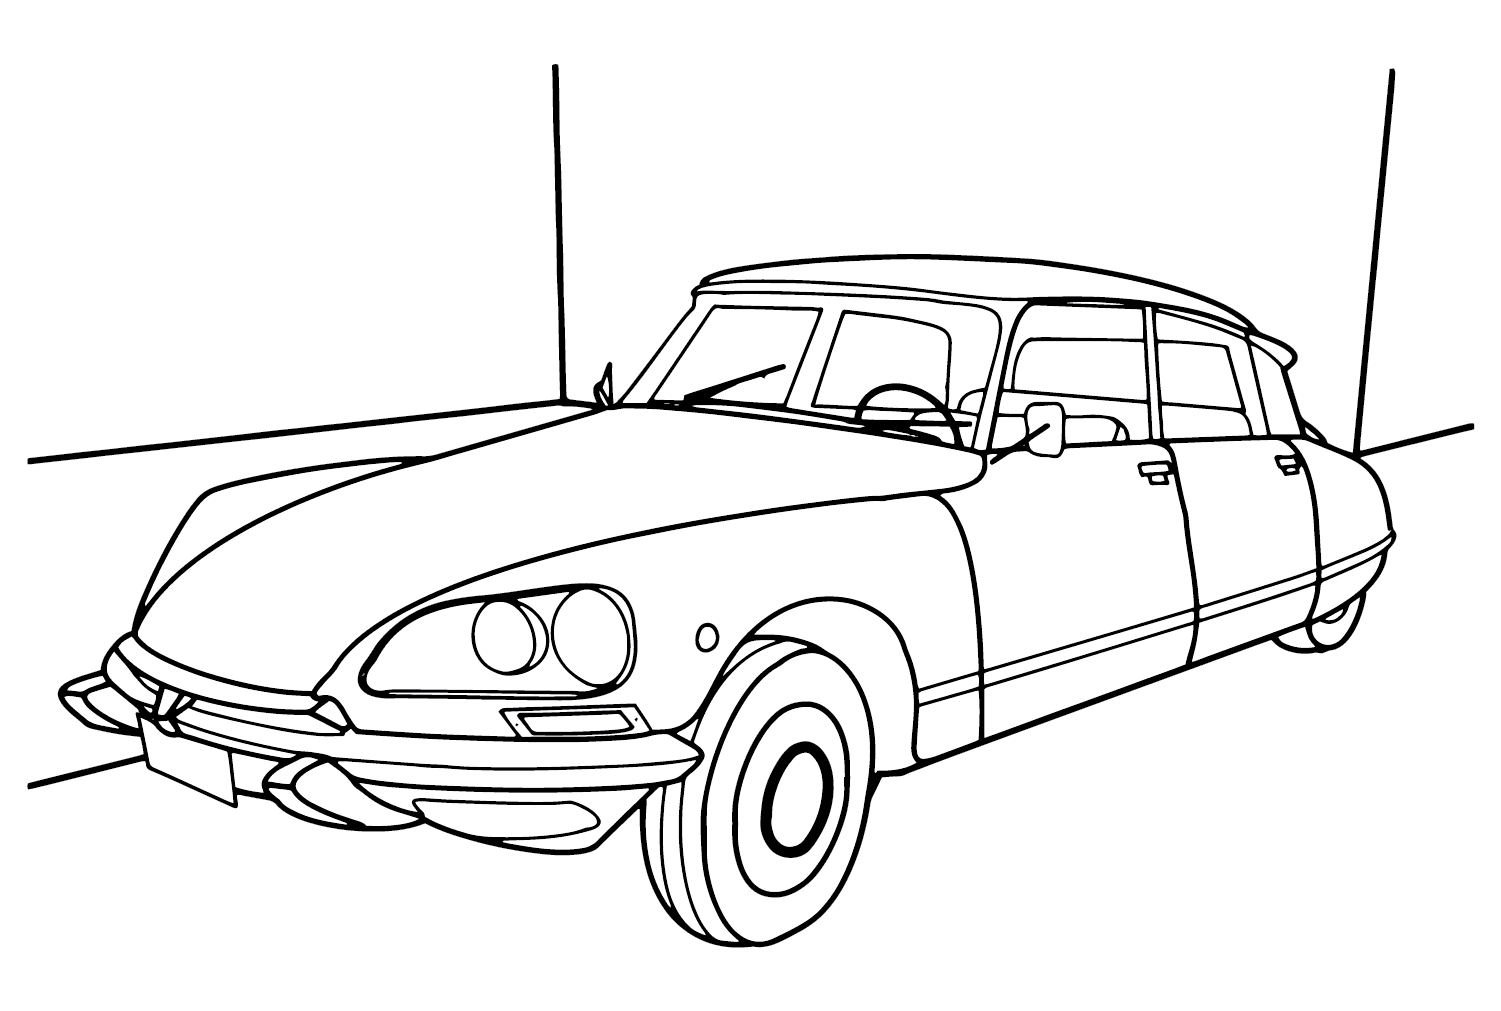 Citroen DS Coloring Page Free from Citroën